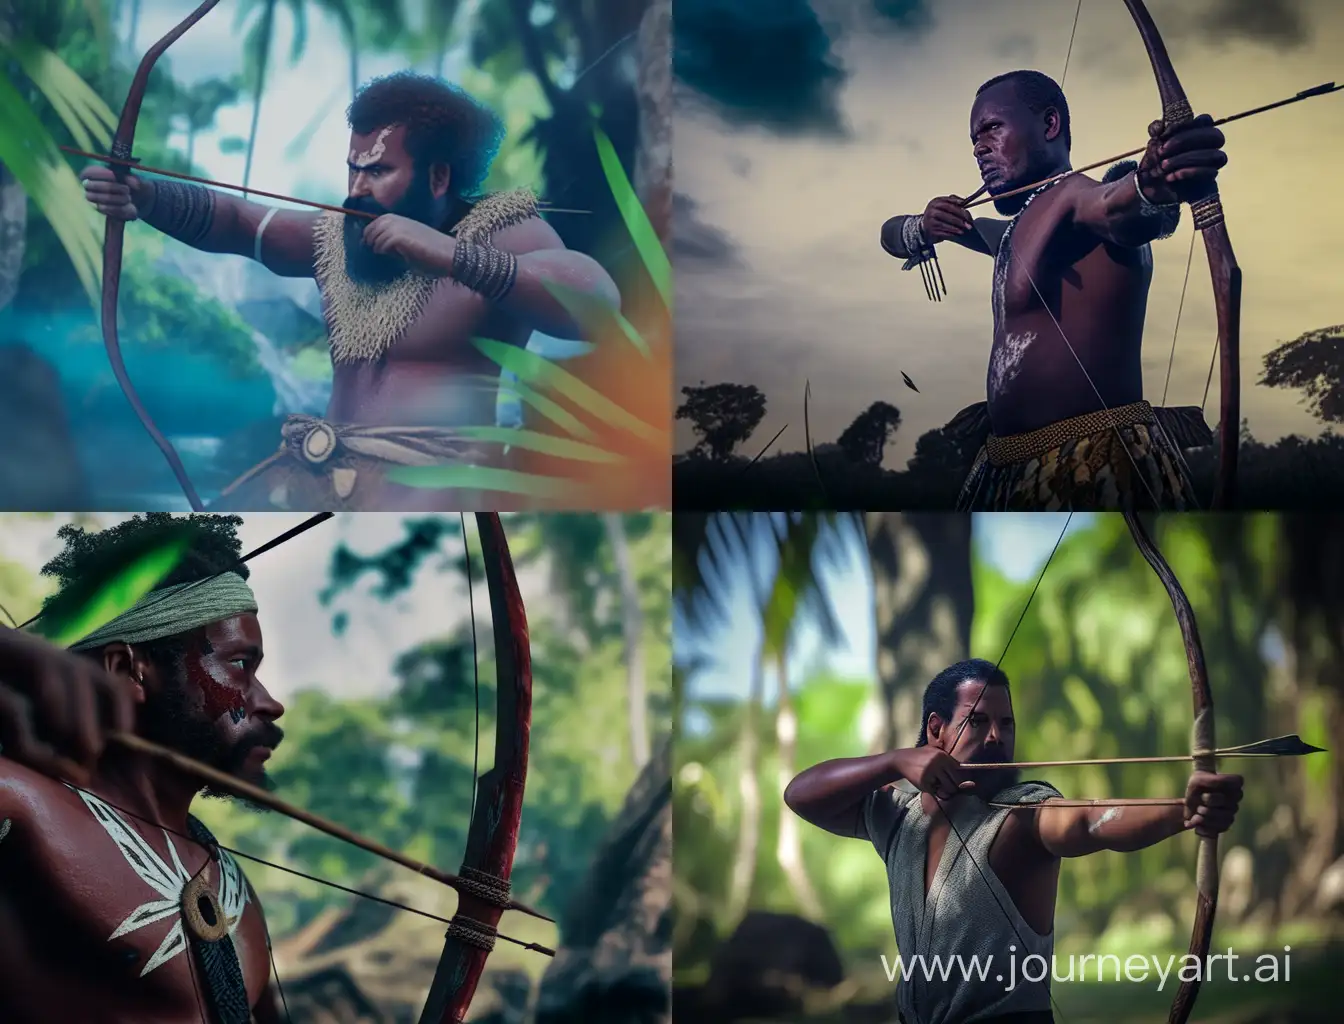 NiVanuatu-Man-Engaged-in-Traditional-Bow-and-Arrow-Hunting